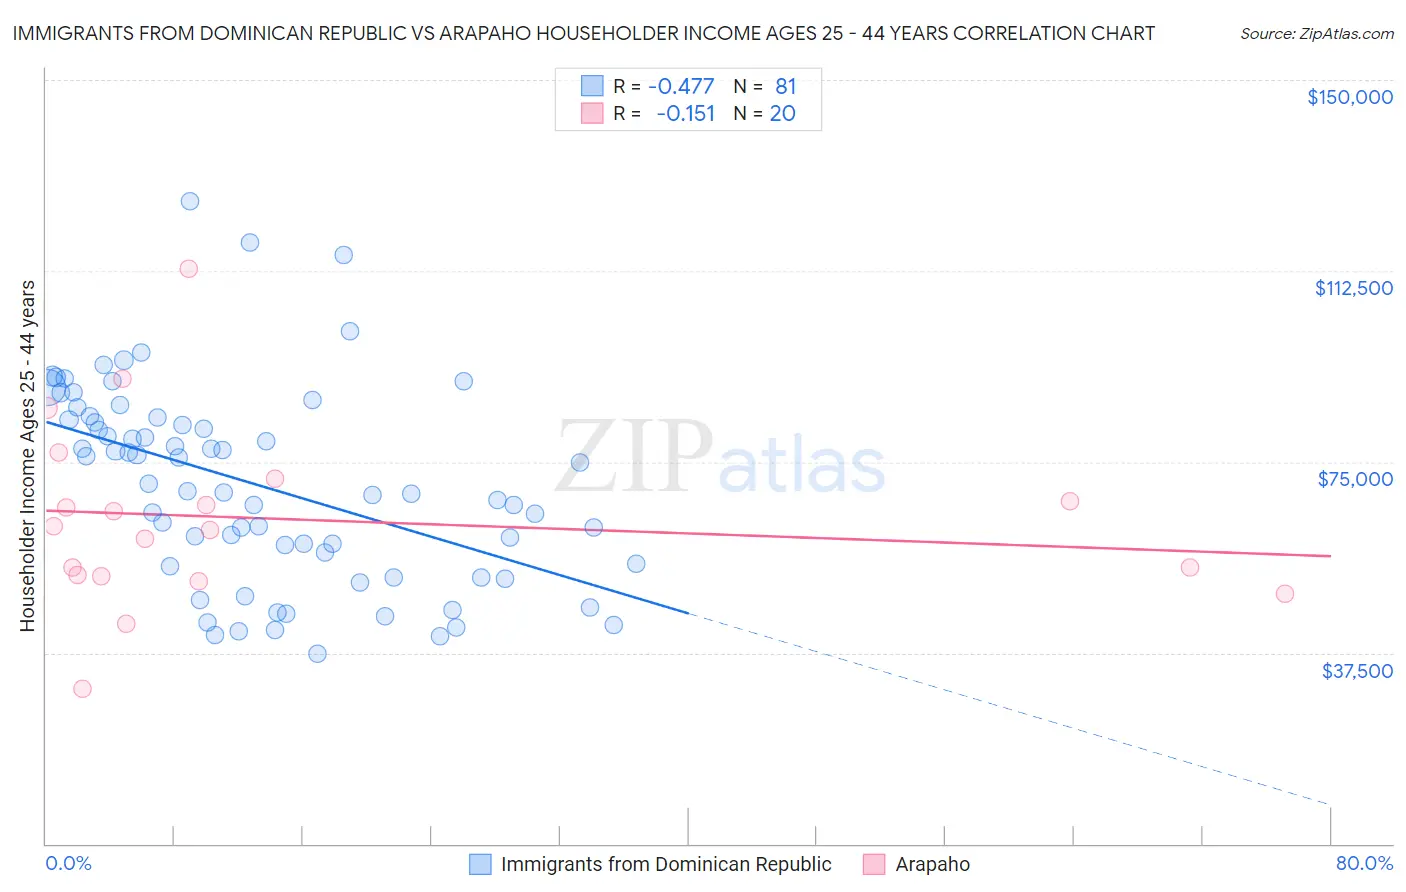 Immigrants from Dominican Republic vs Arapaho Householder Income Ages 25 - 44 years